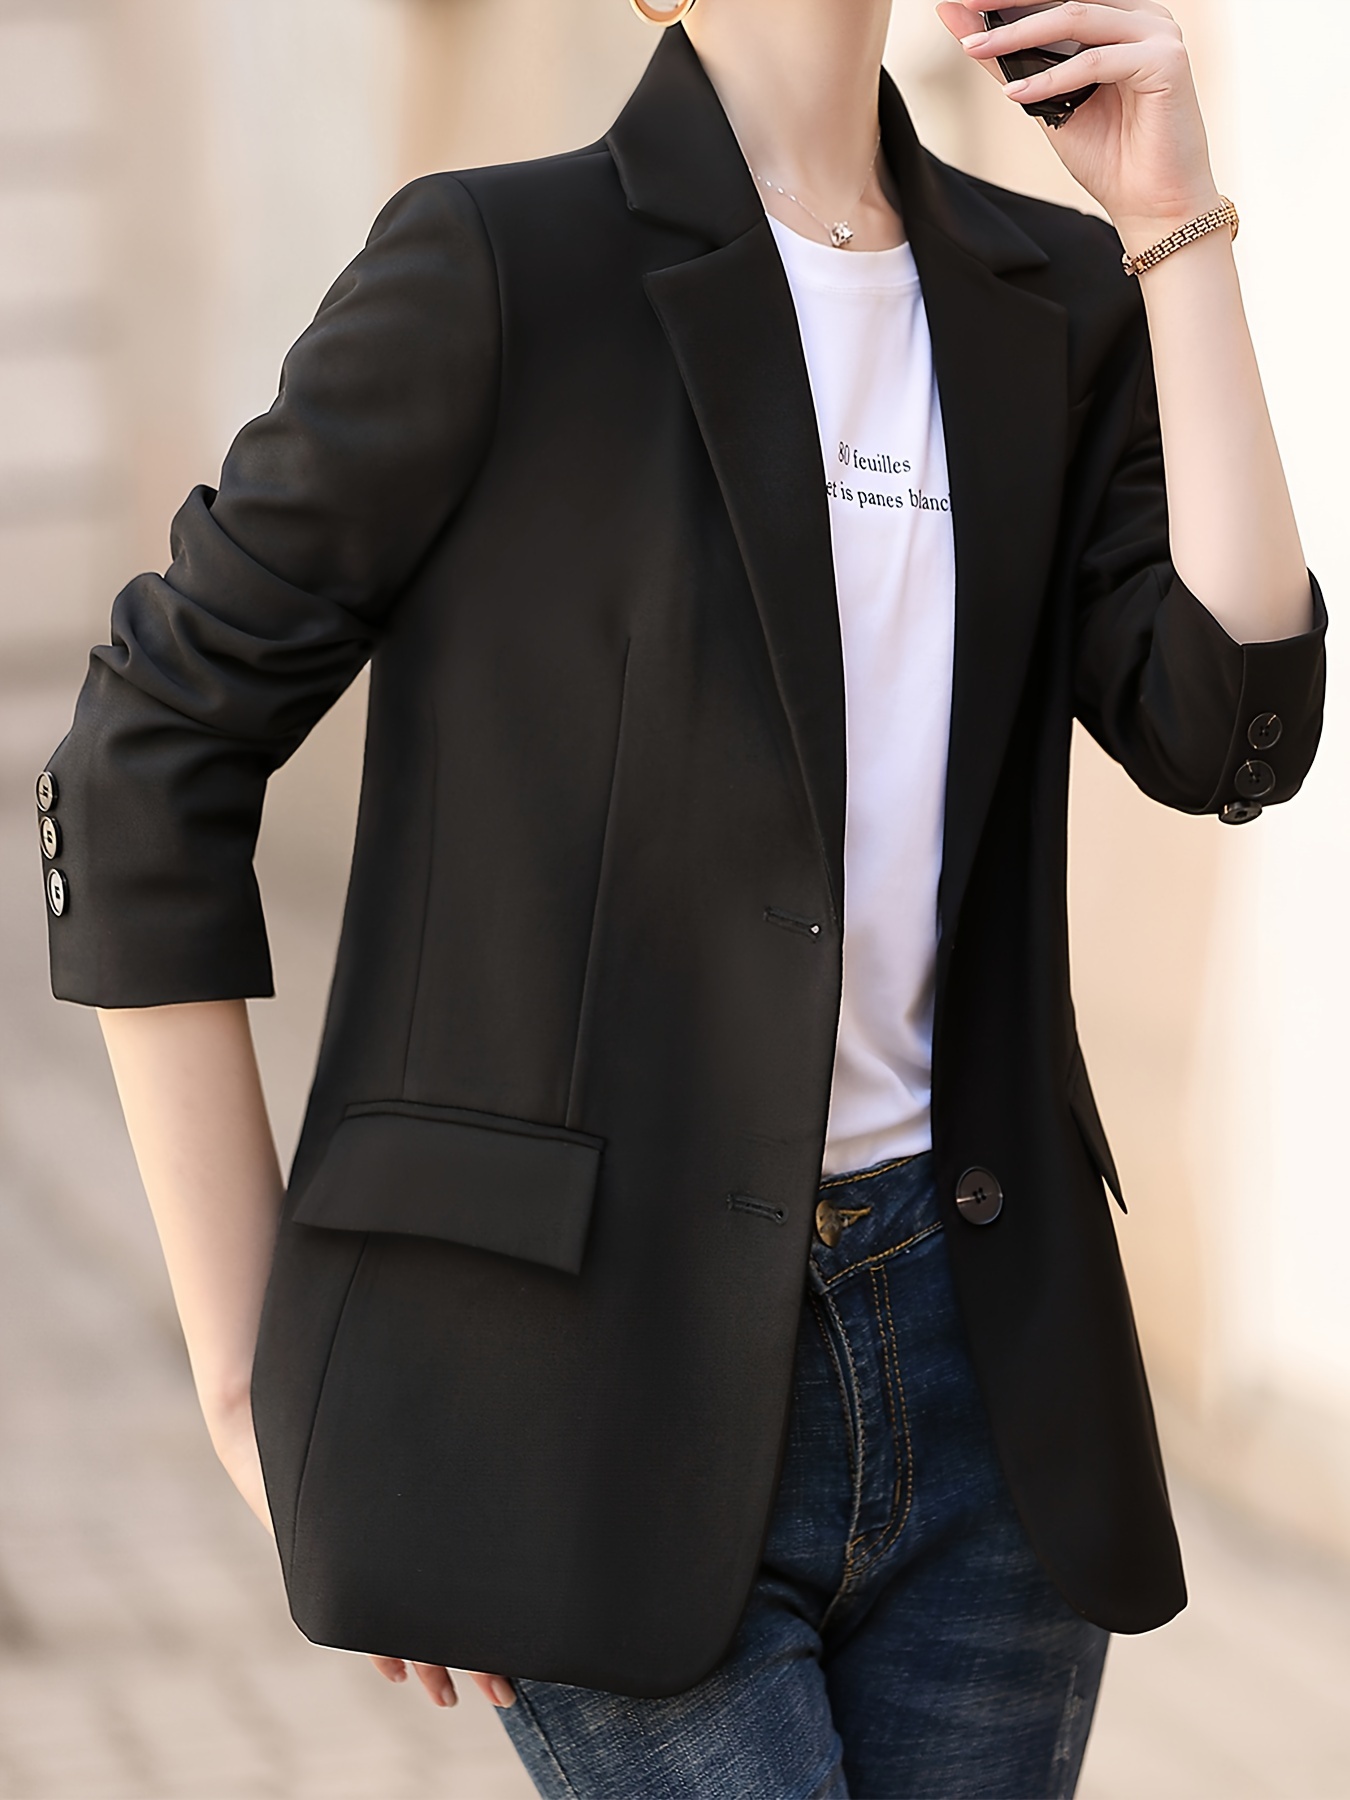 Single Breasted Lapel Neck Blazer, Casual Solid Long Sleeve Blazer For Office & Work, Women s Clothing details 6